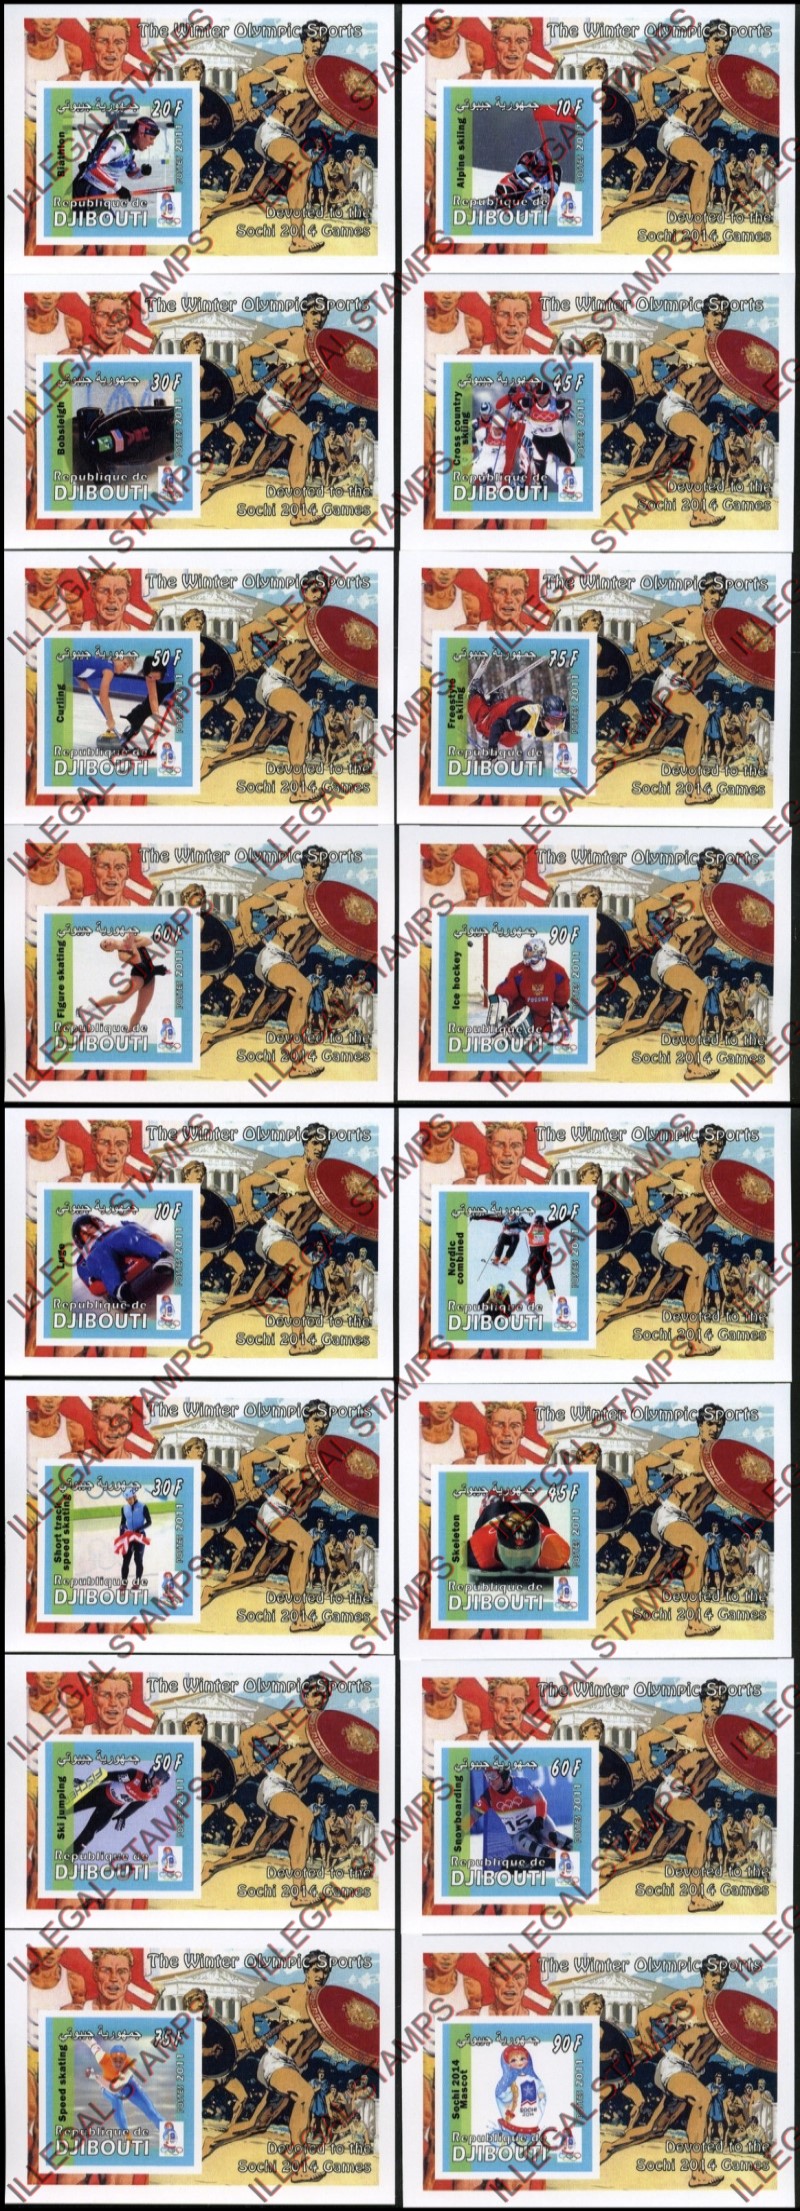 Djibouti 2011 Winter Olympic Games Illegal Stamp Souvenir Sheets of 1